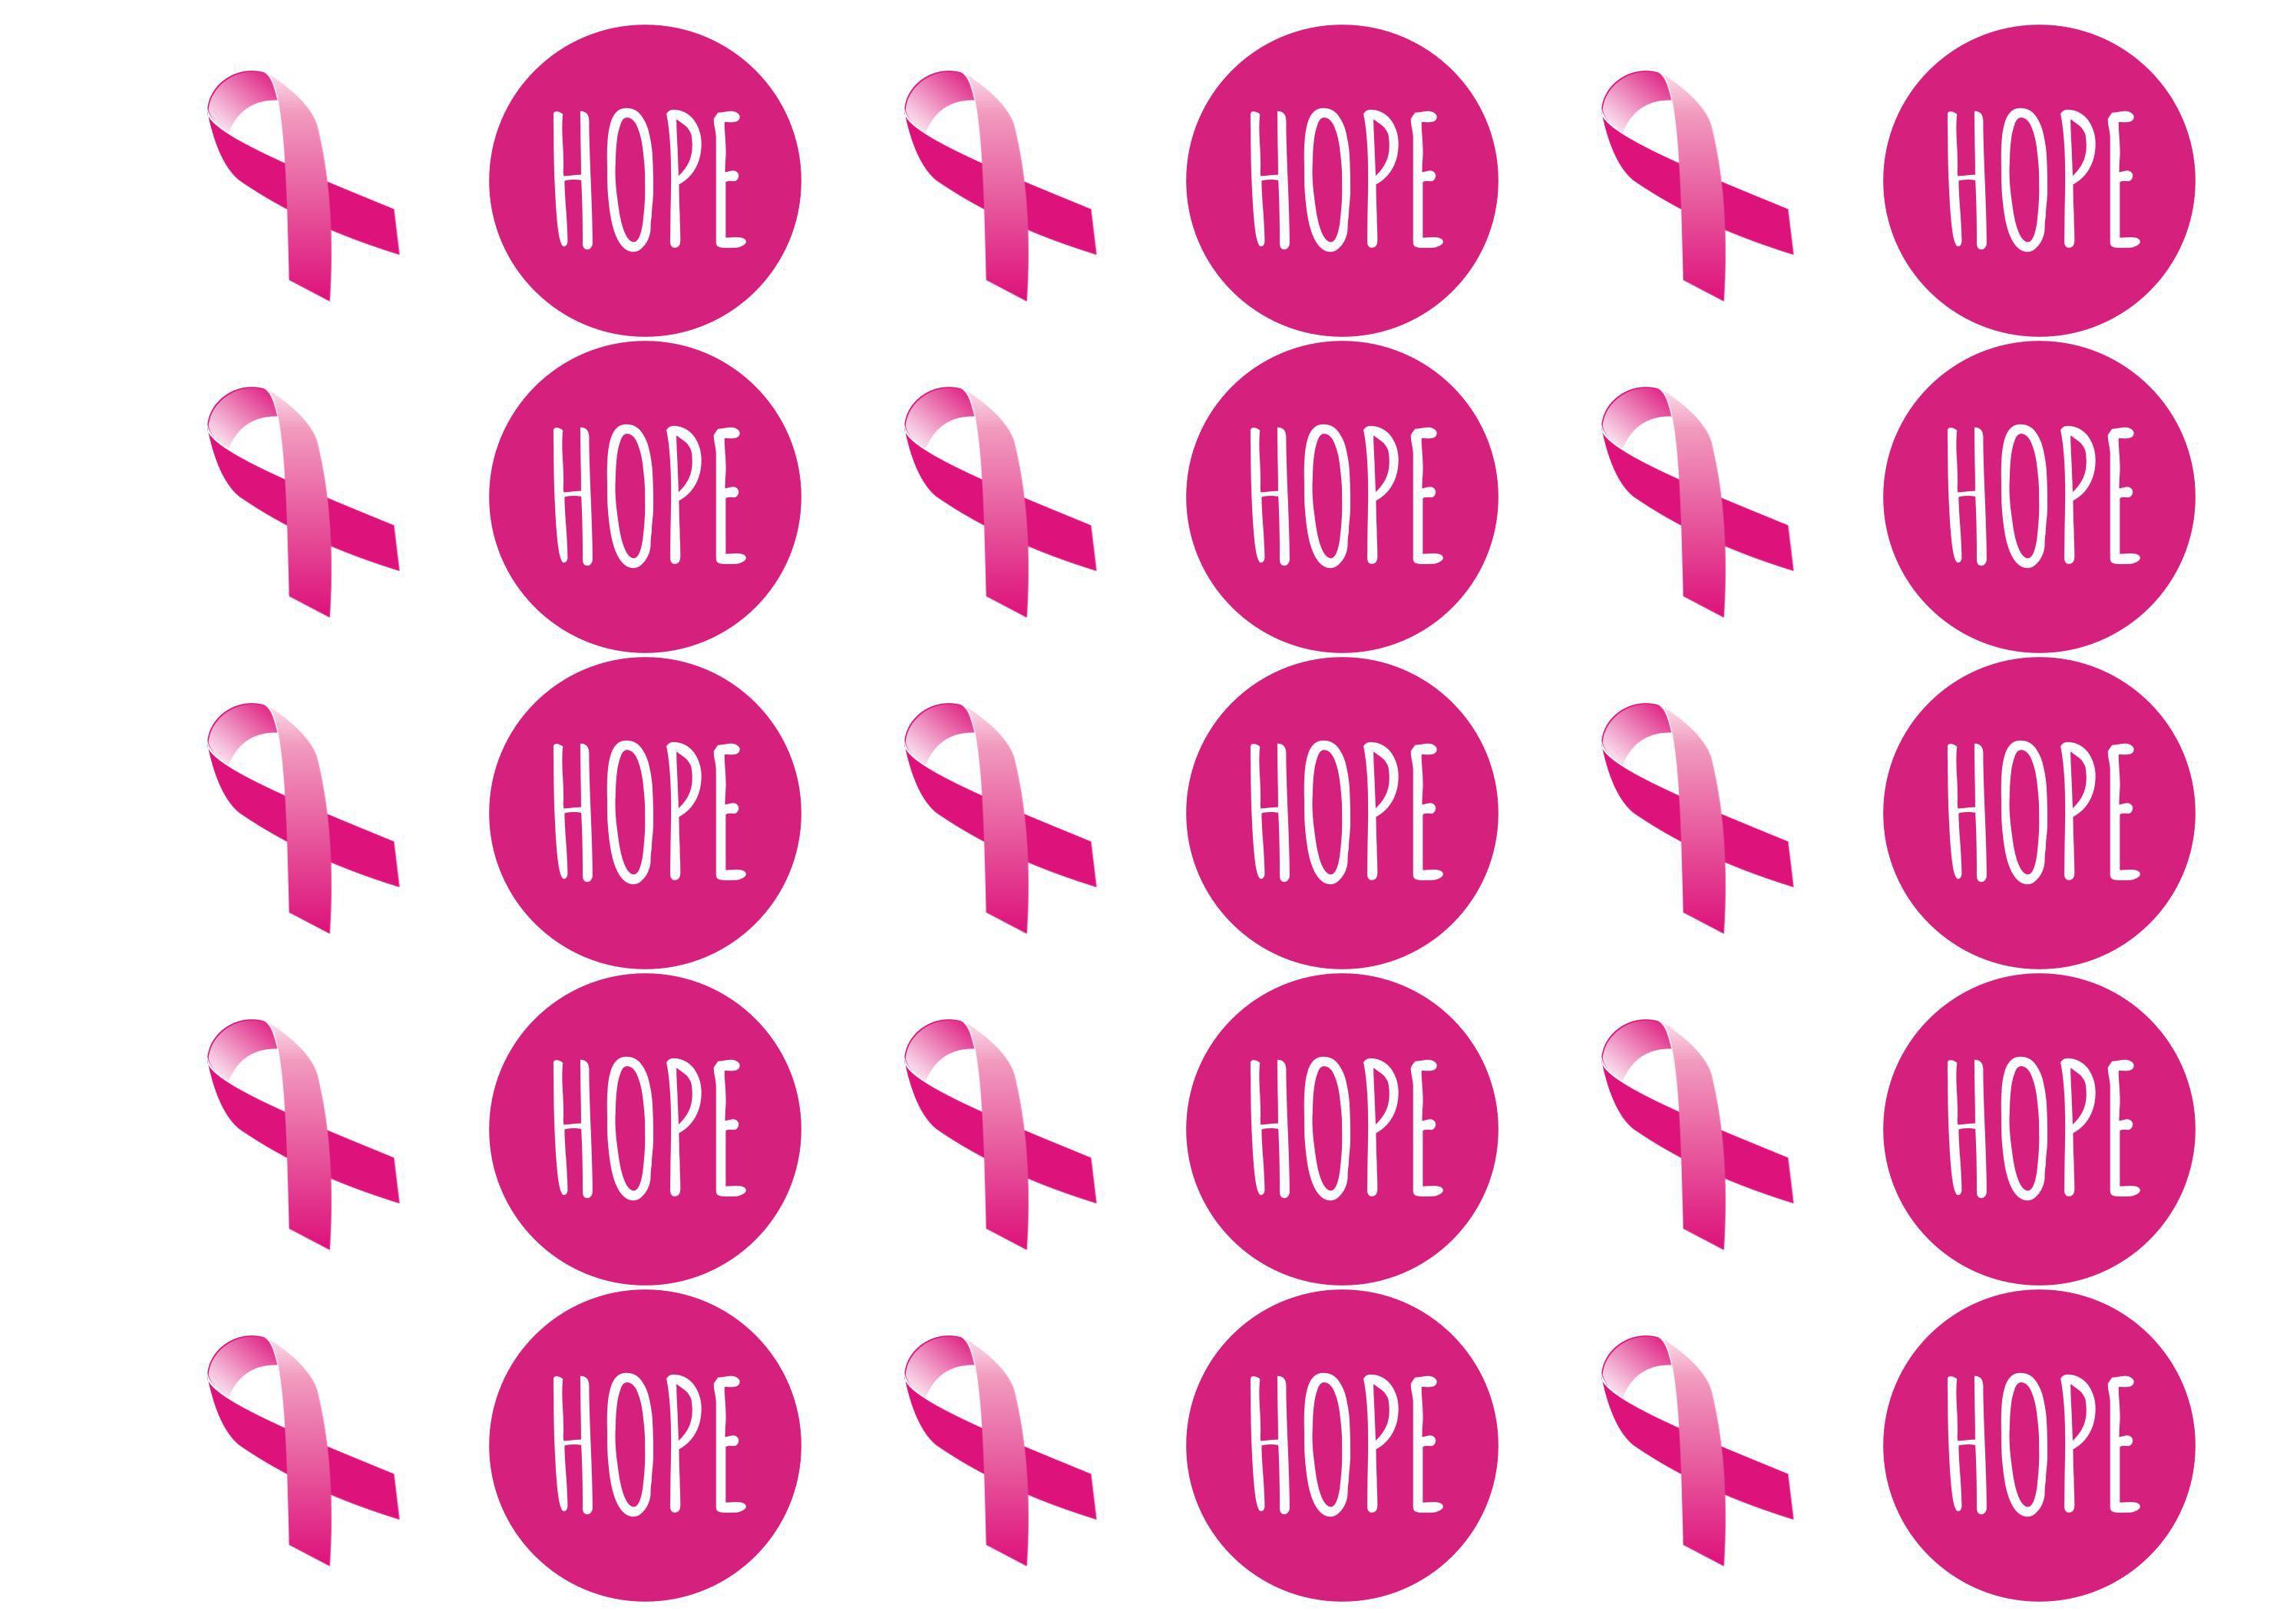 30 edible cupcake toppers with a pink ribbon and hope for breast cancer